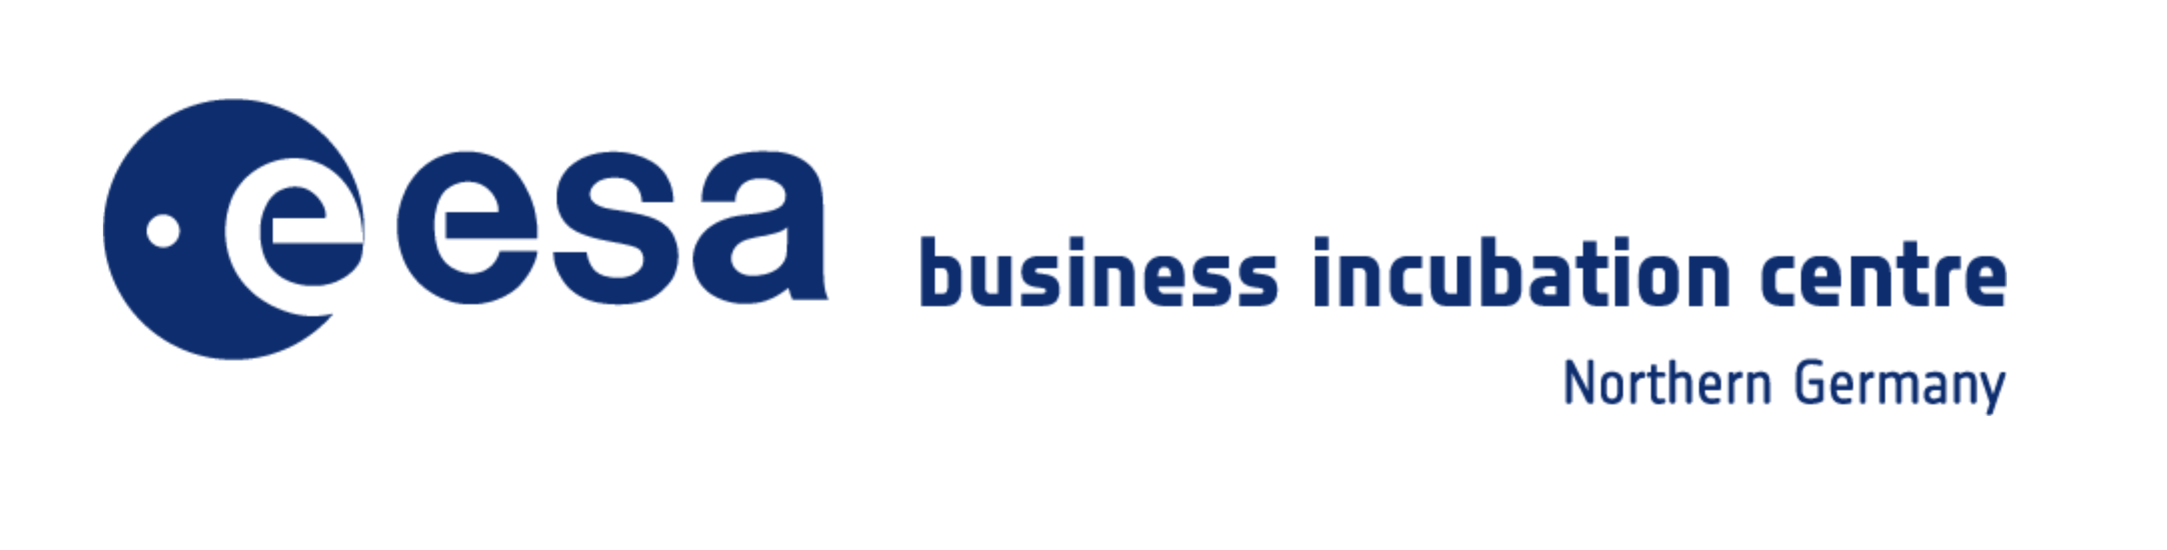 ESA Business Incubation Center Northern Germany Logo